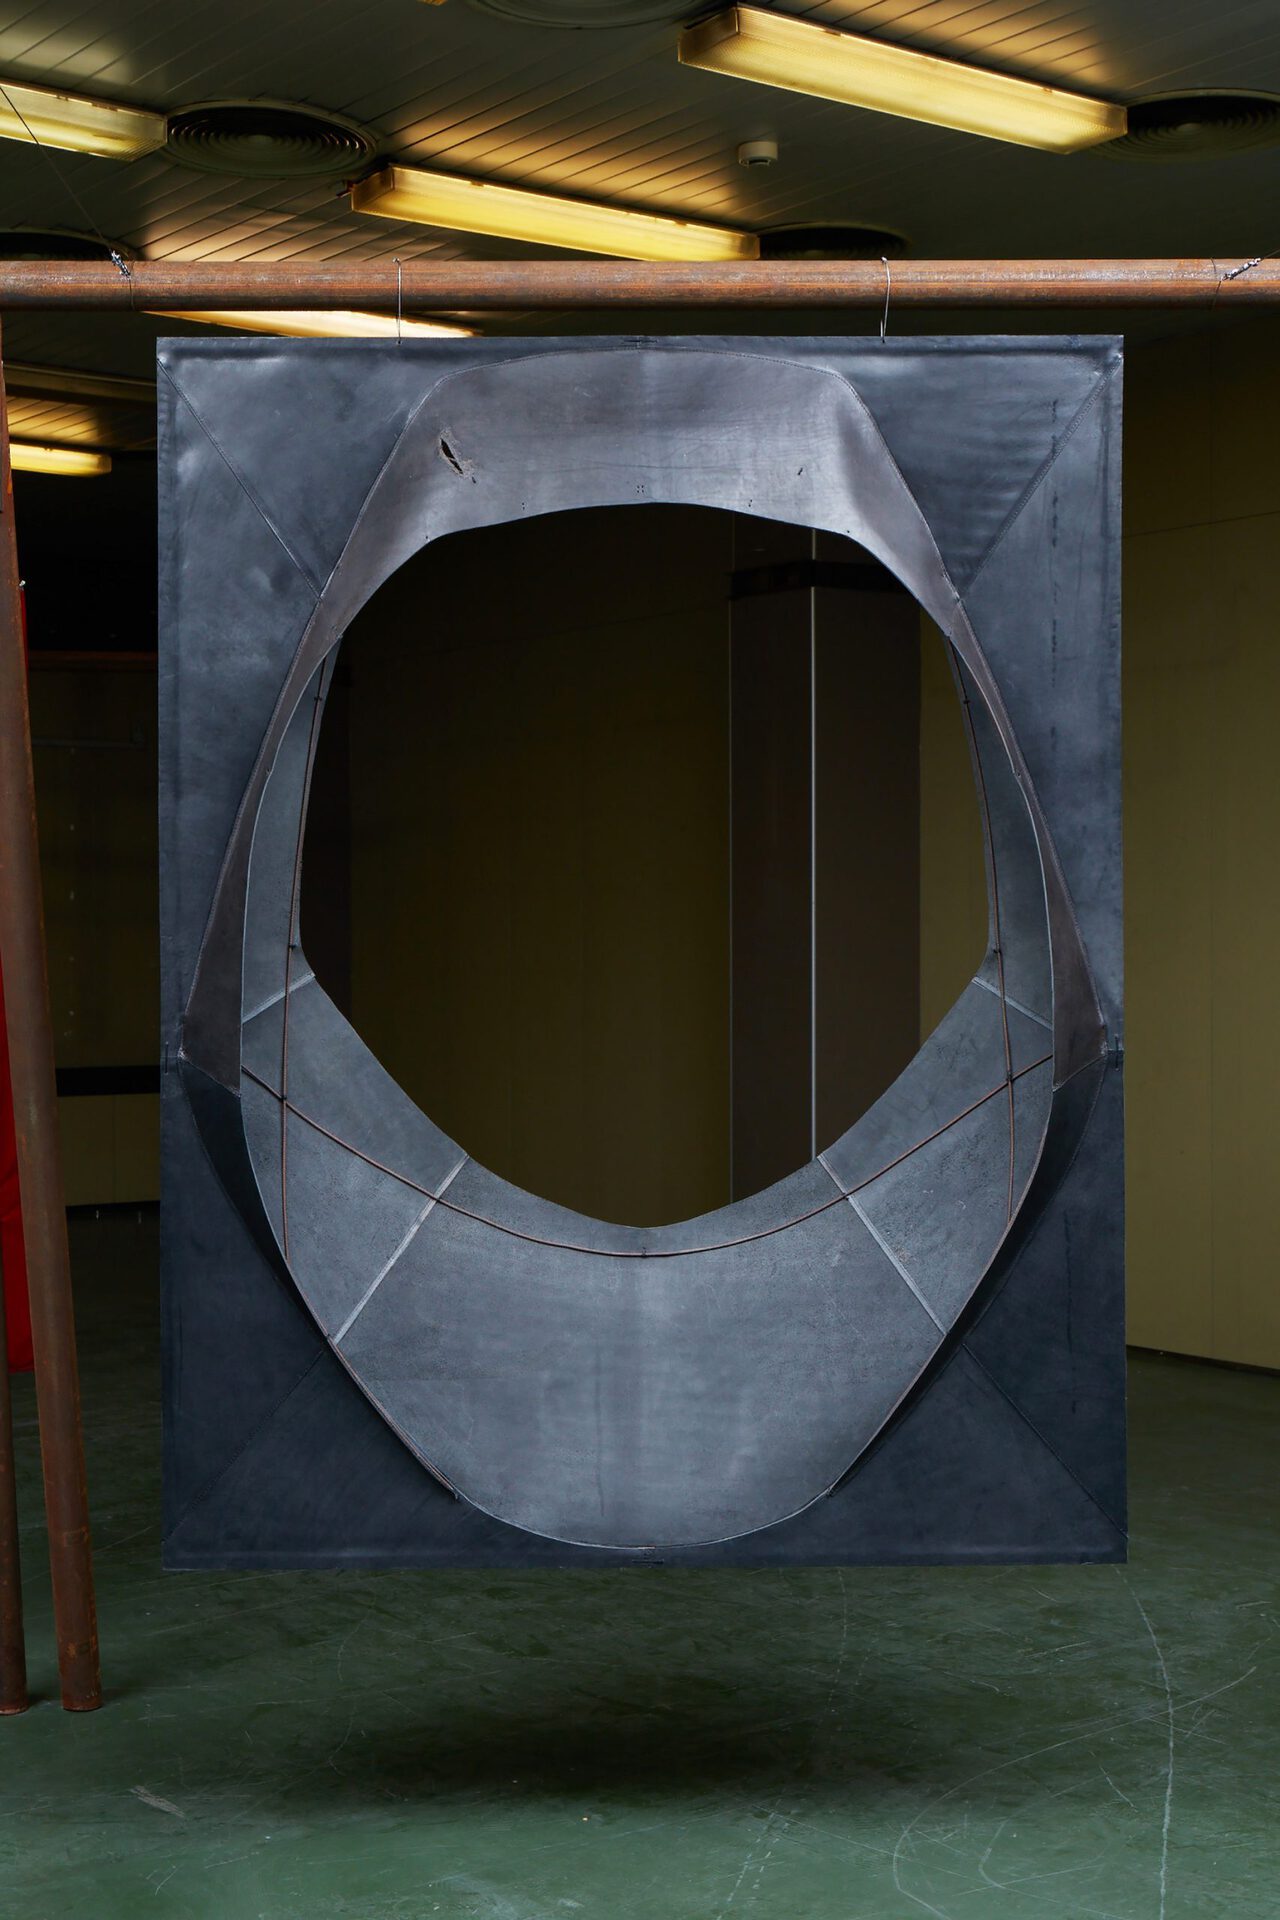 Adrian Kiss, Leather Hole 1, 2021, Leather, metal structure, 185 × 150 cm